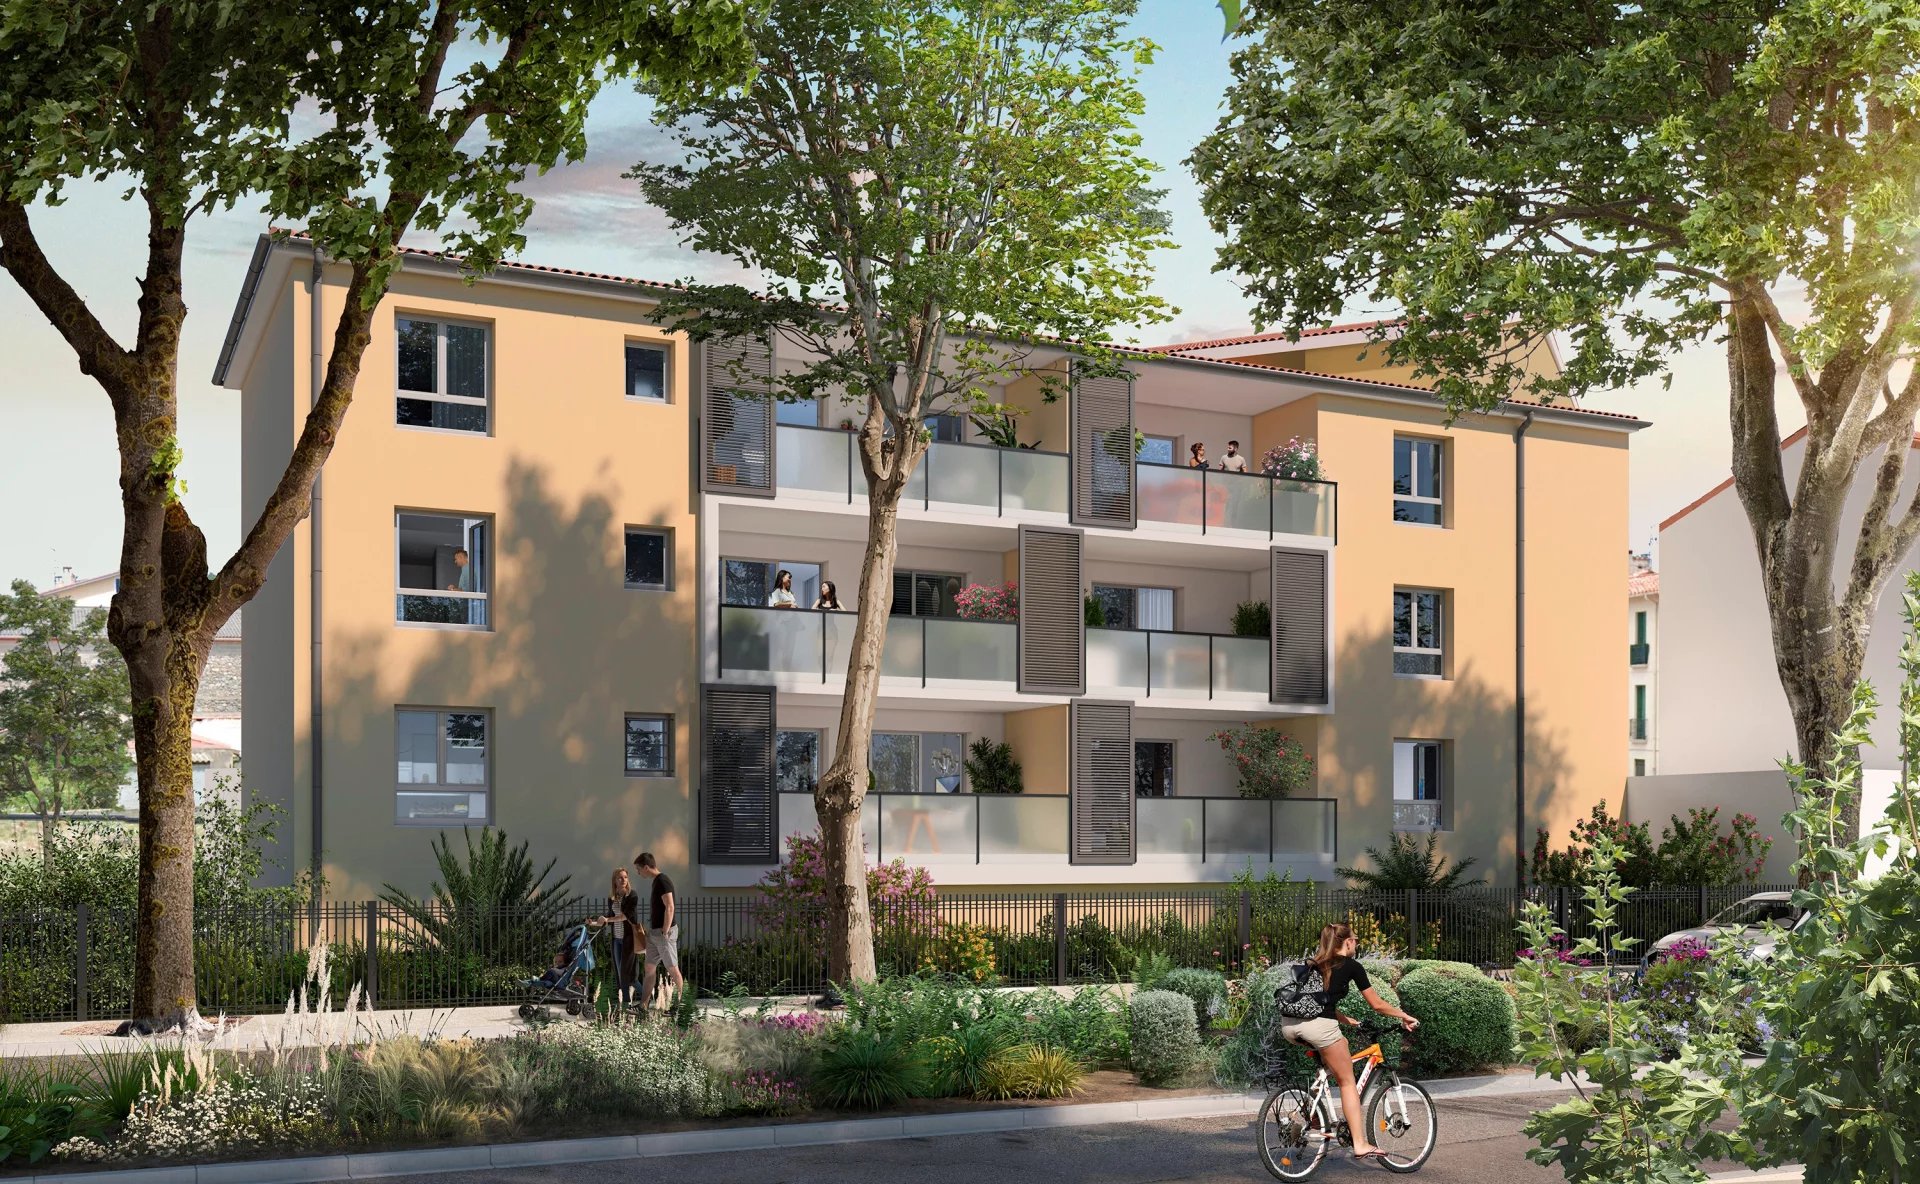 OFF-PLAN 1-BED APPARTMENT (LOT 304), RESIDENCE L'ANGLE DES ARTS, CERET